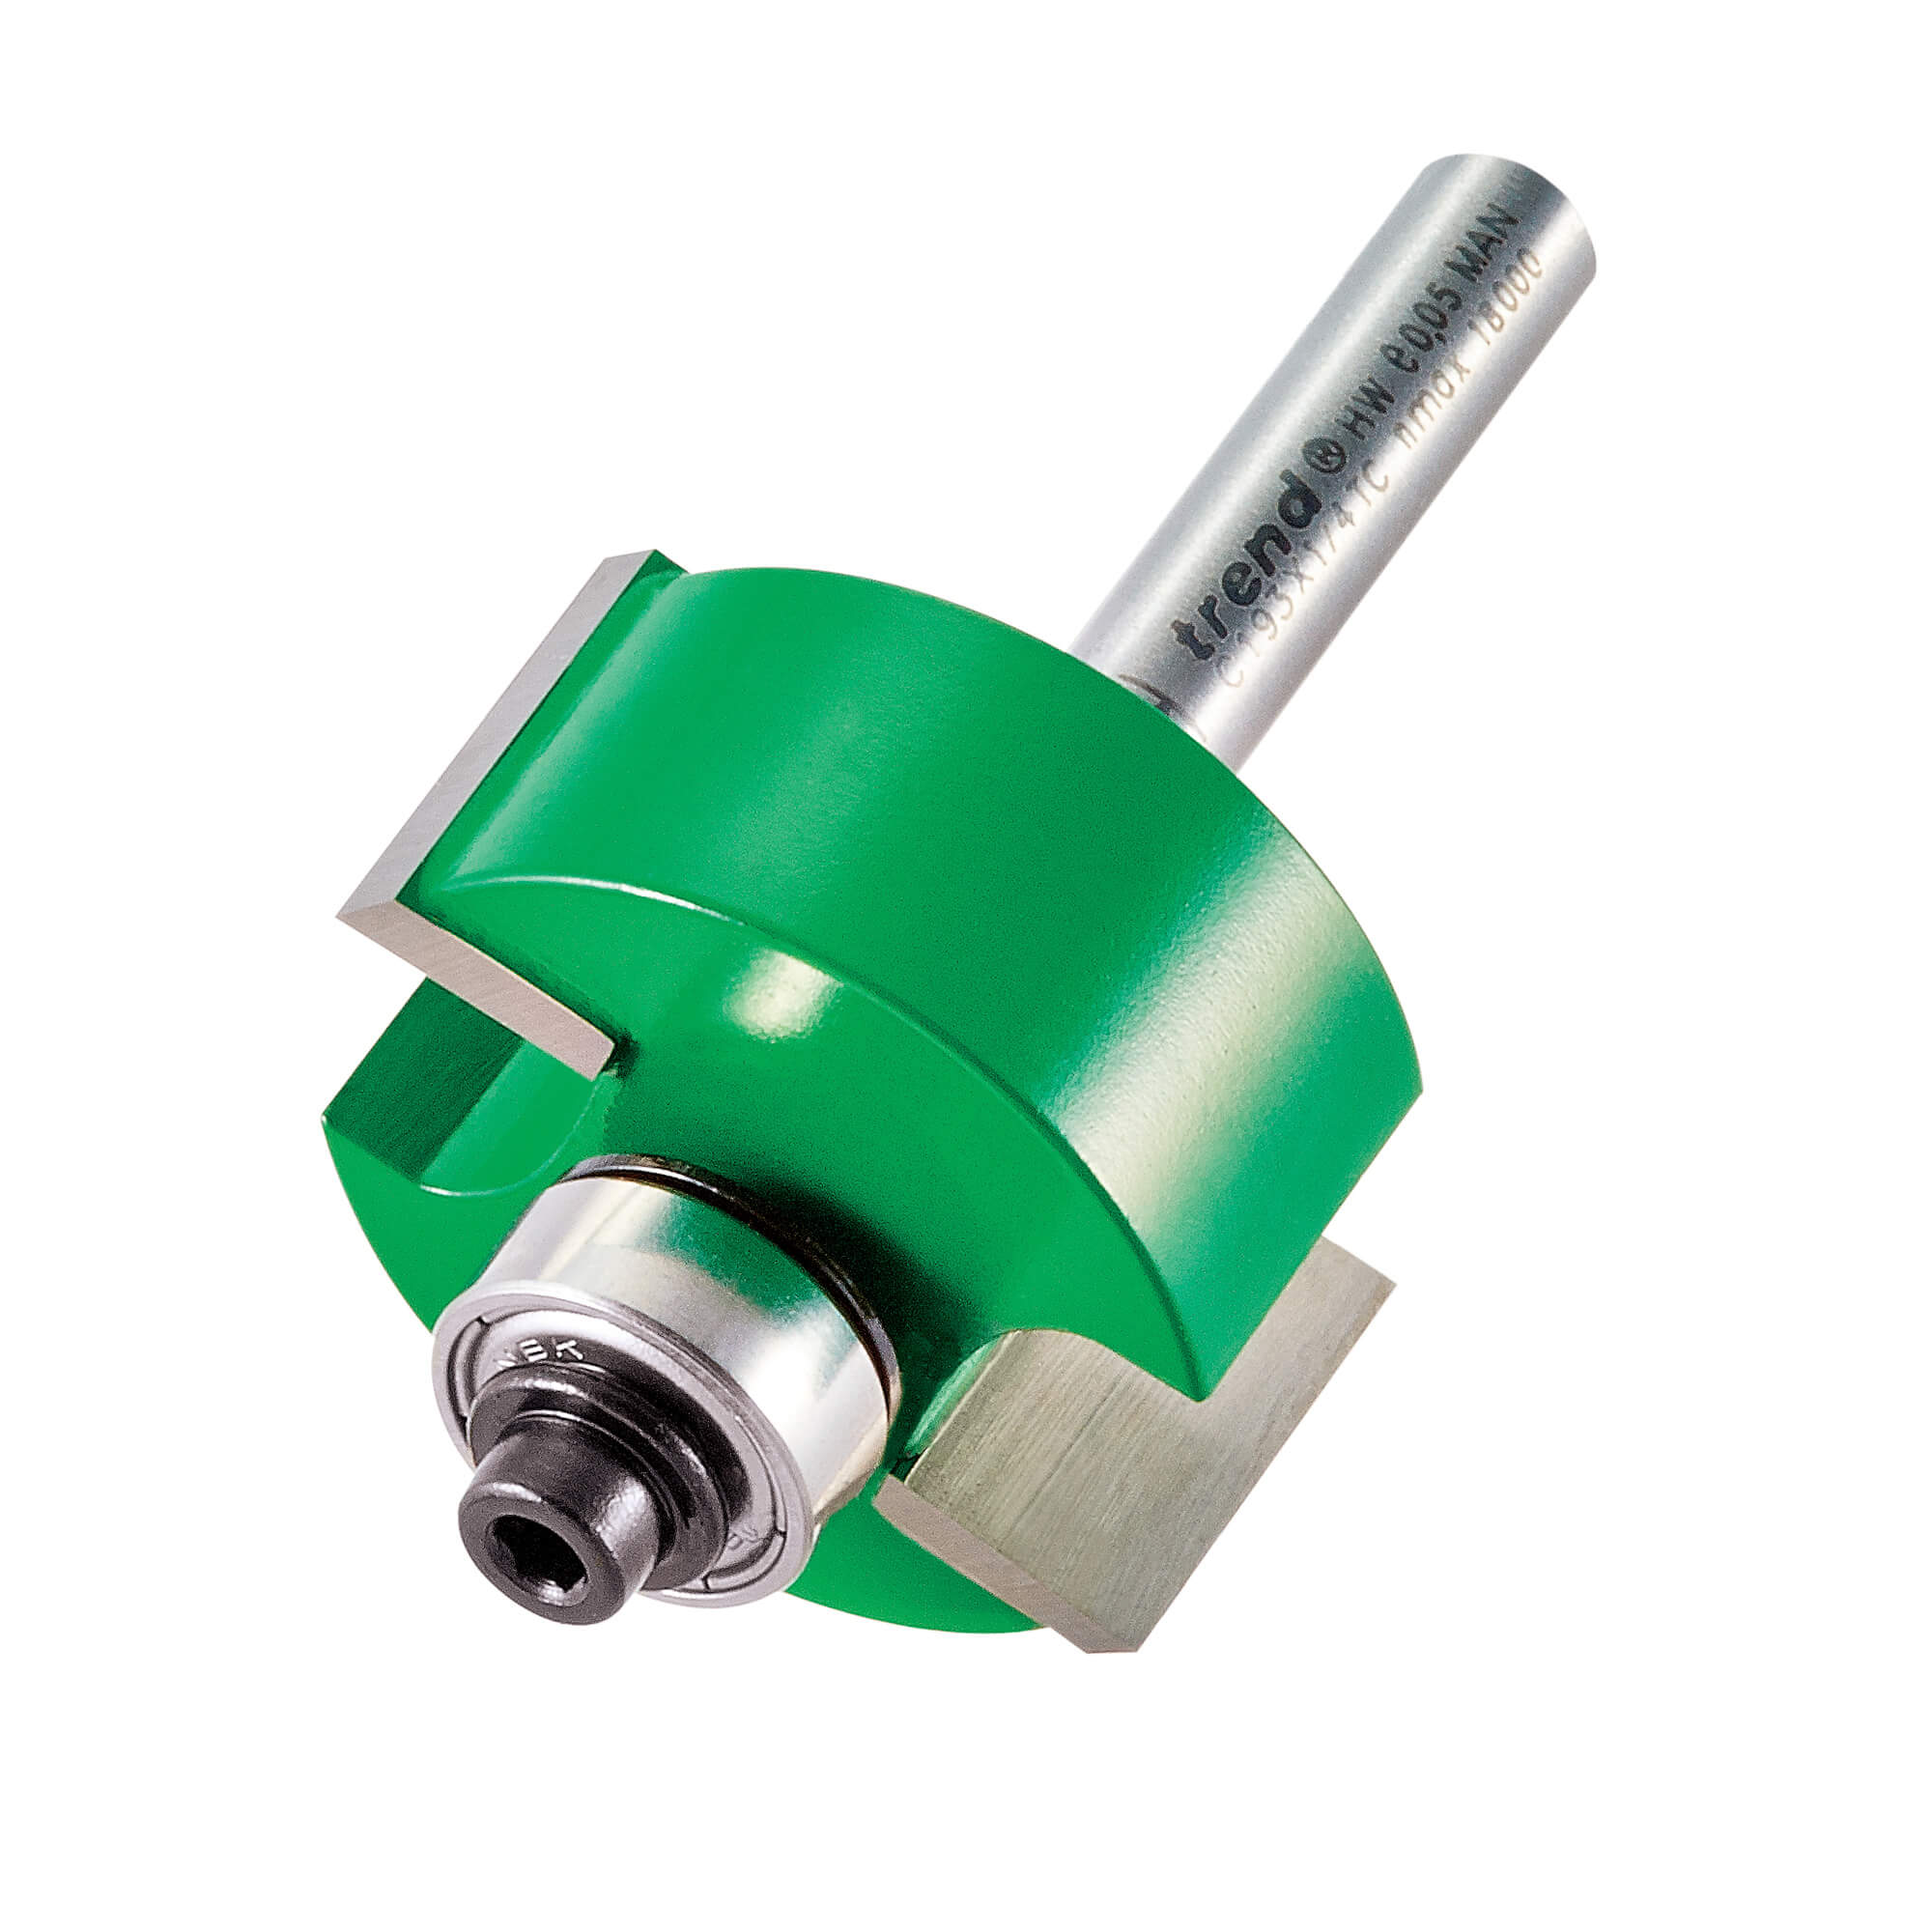 Image of Trend Bearing Self Guided Rebate Router Cutter 31.8mm 15.9mm 1/4"